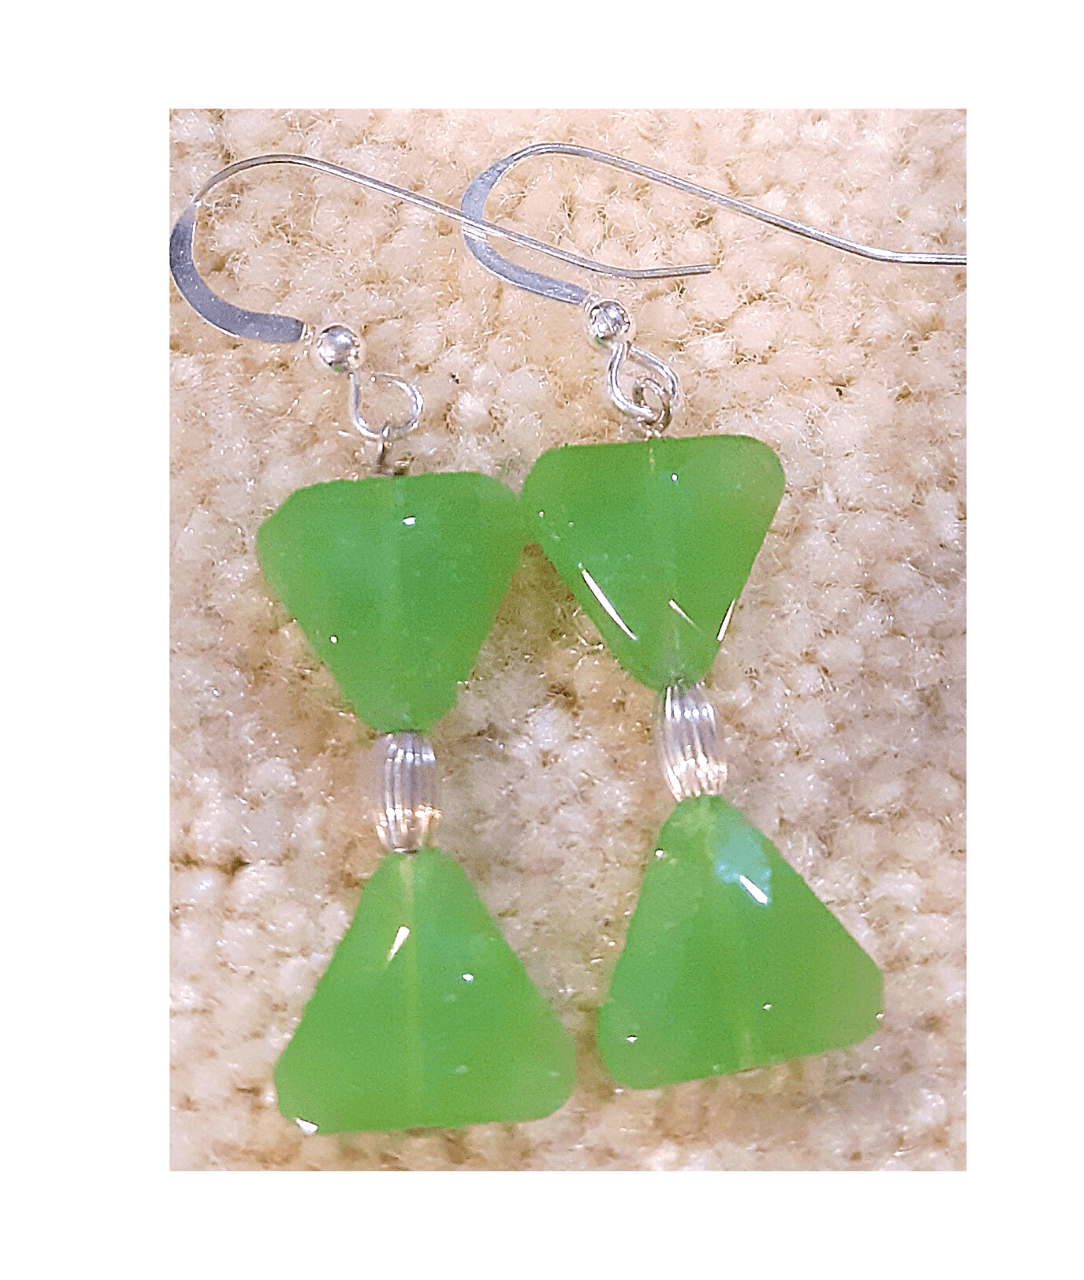 Green Chalcedony and Silver Bead Sterling Silver Dangle Earrings approx. 1 1/2" L X 1/4" W